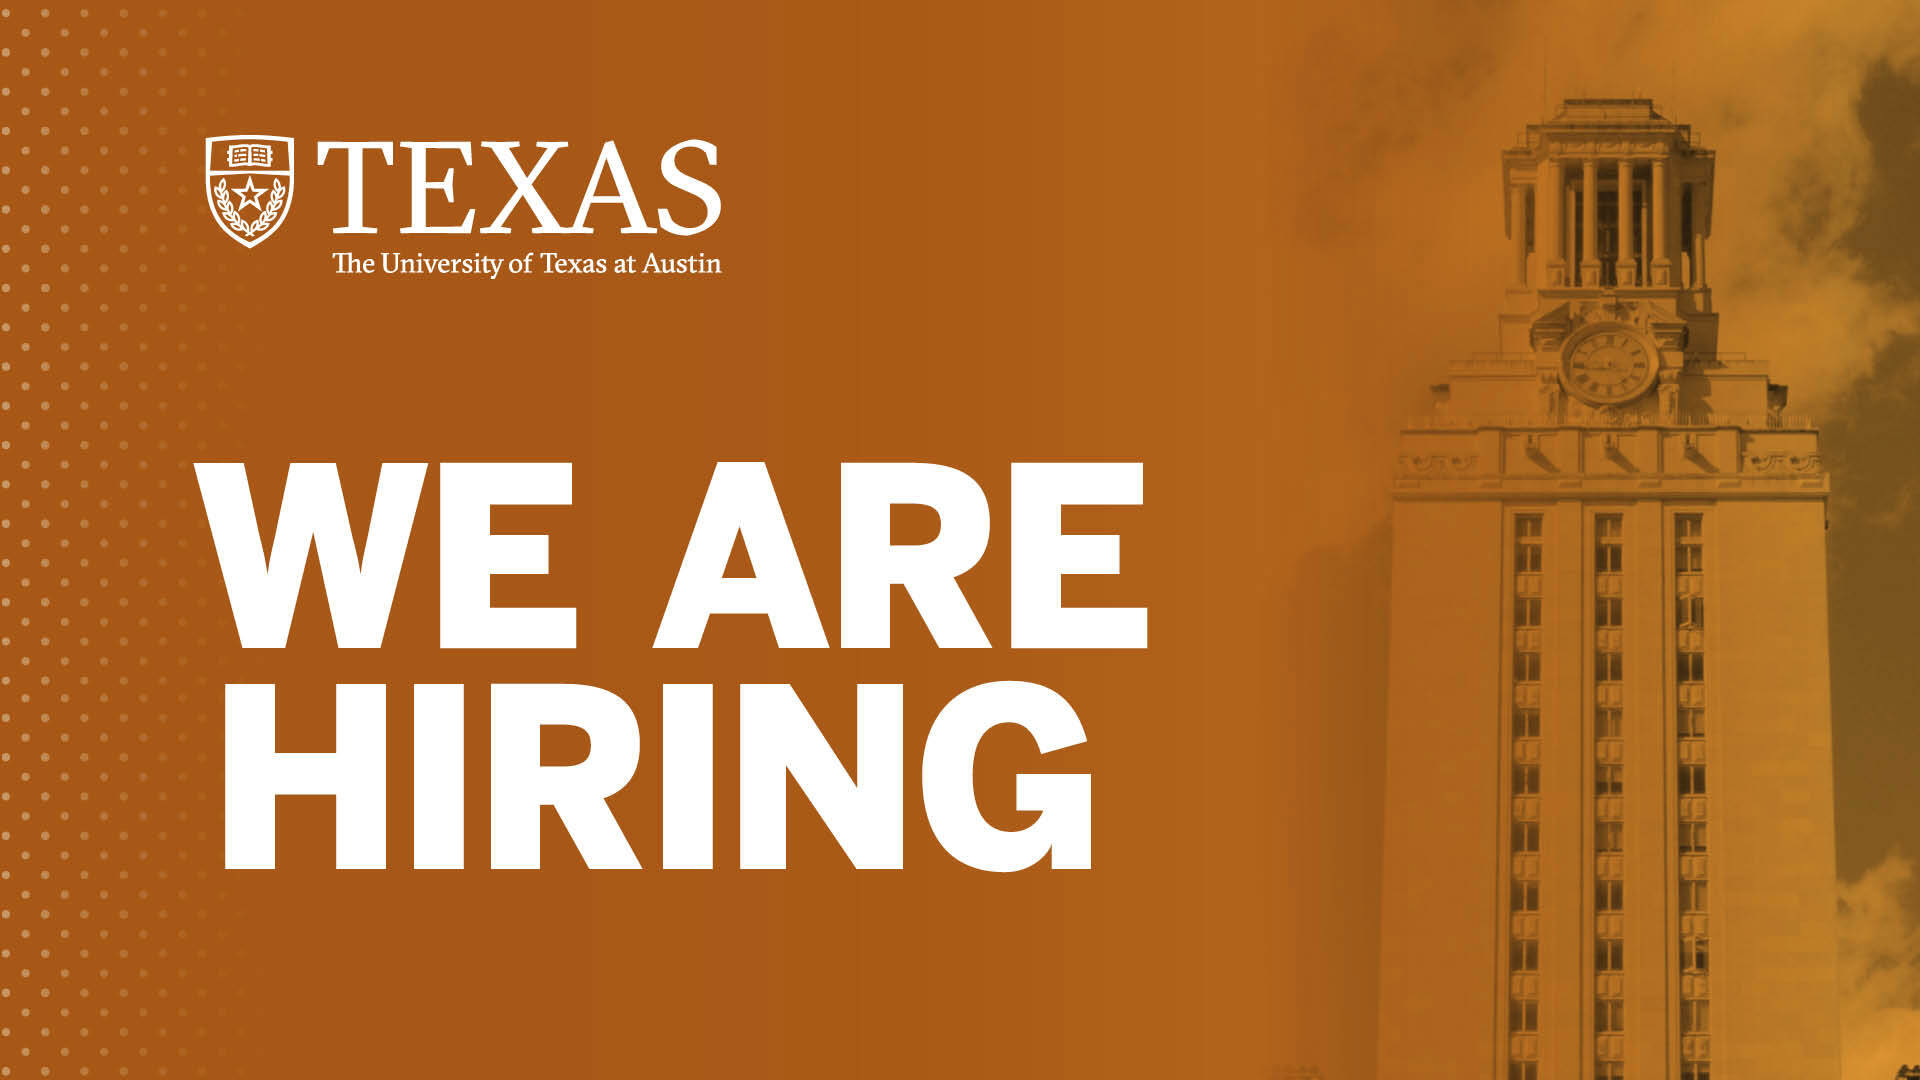 An orange We are hiring banner with white text and a image of the UT Tower